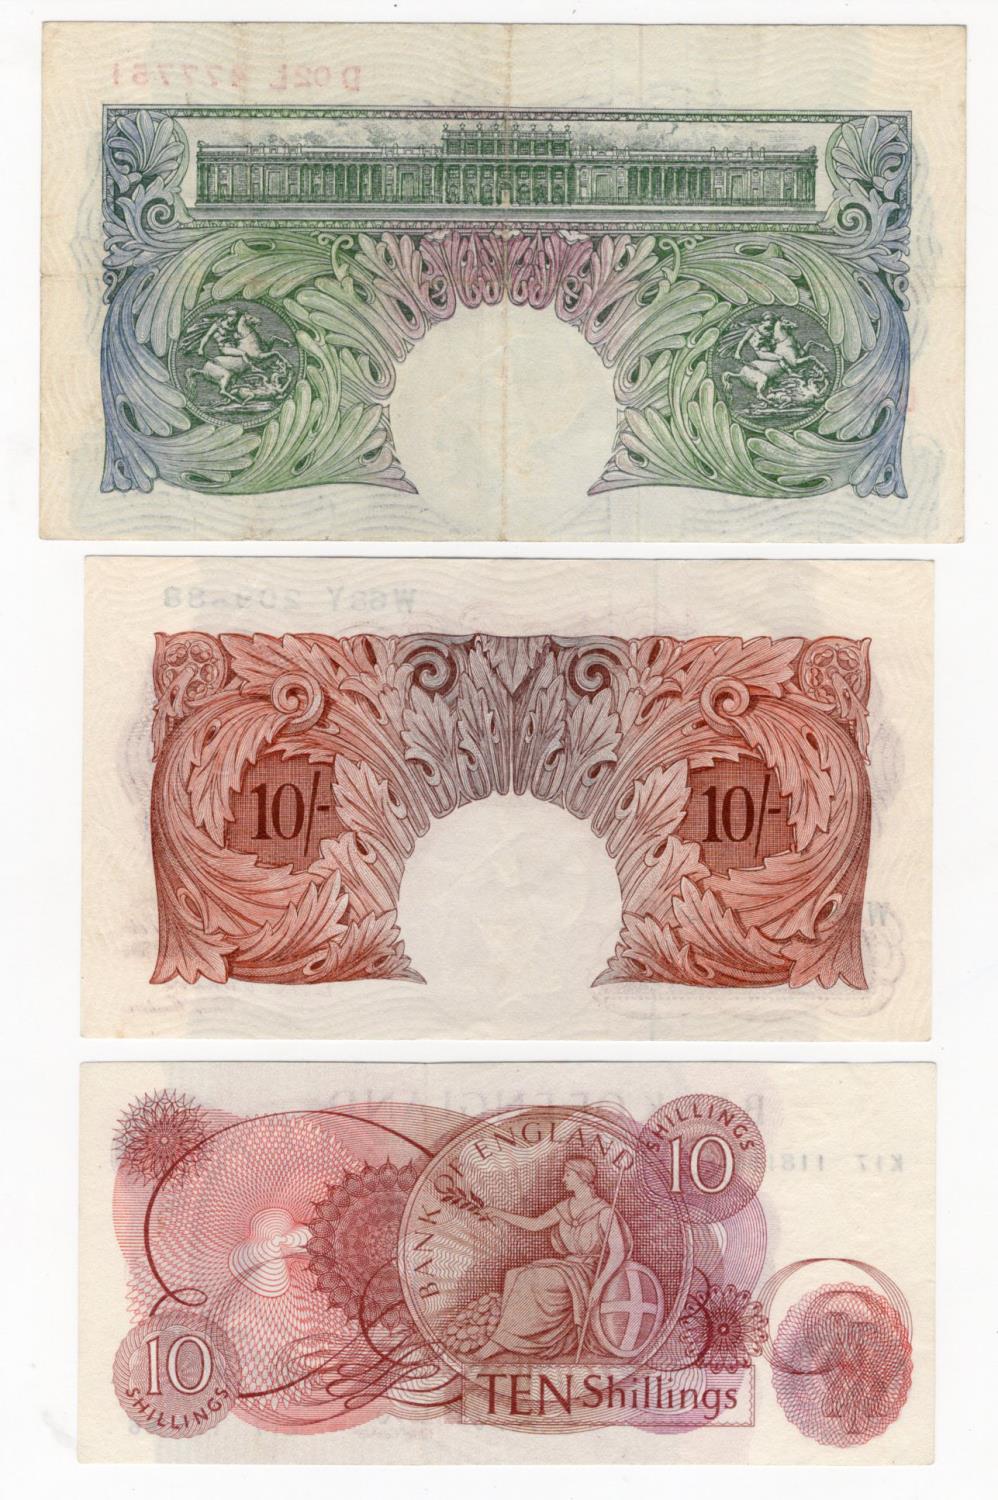 ERROR O'Brien (3), a group of error notes, 1 Pound issued 1955, vertical miscut design at bottom, - Image 2 of 2